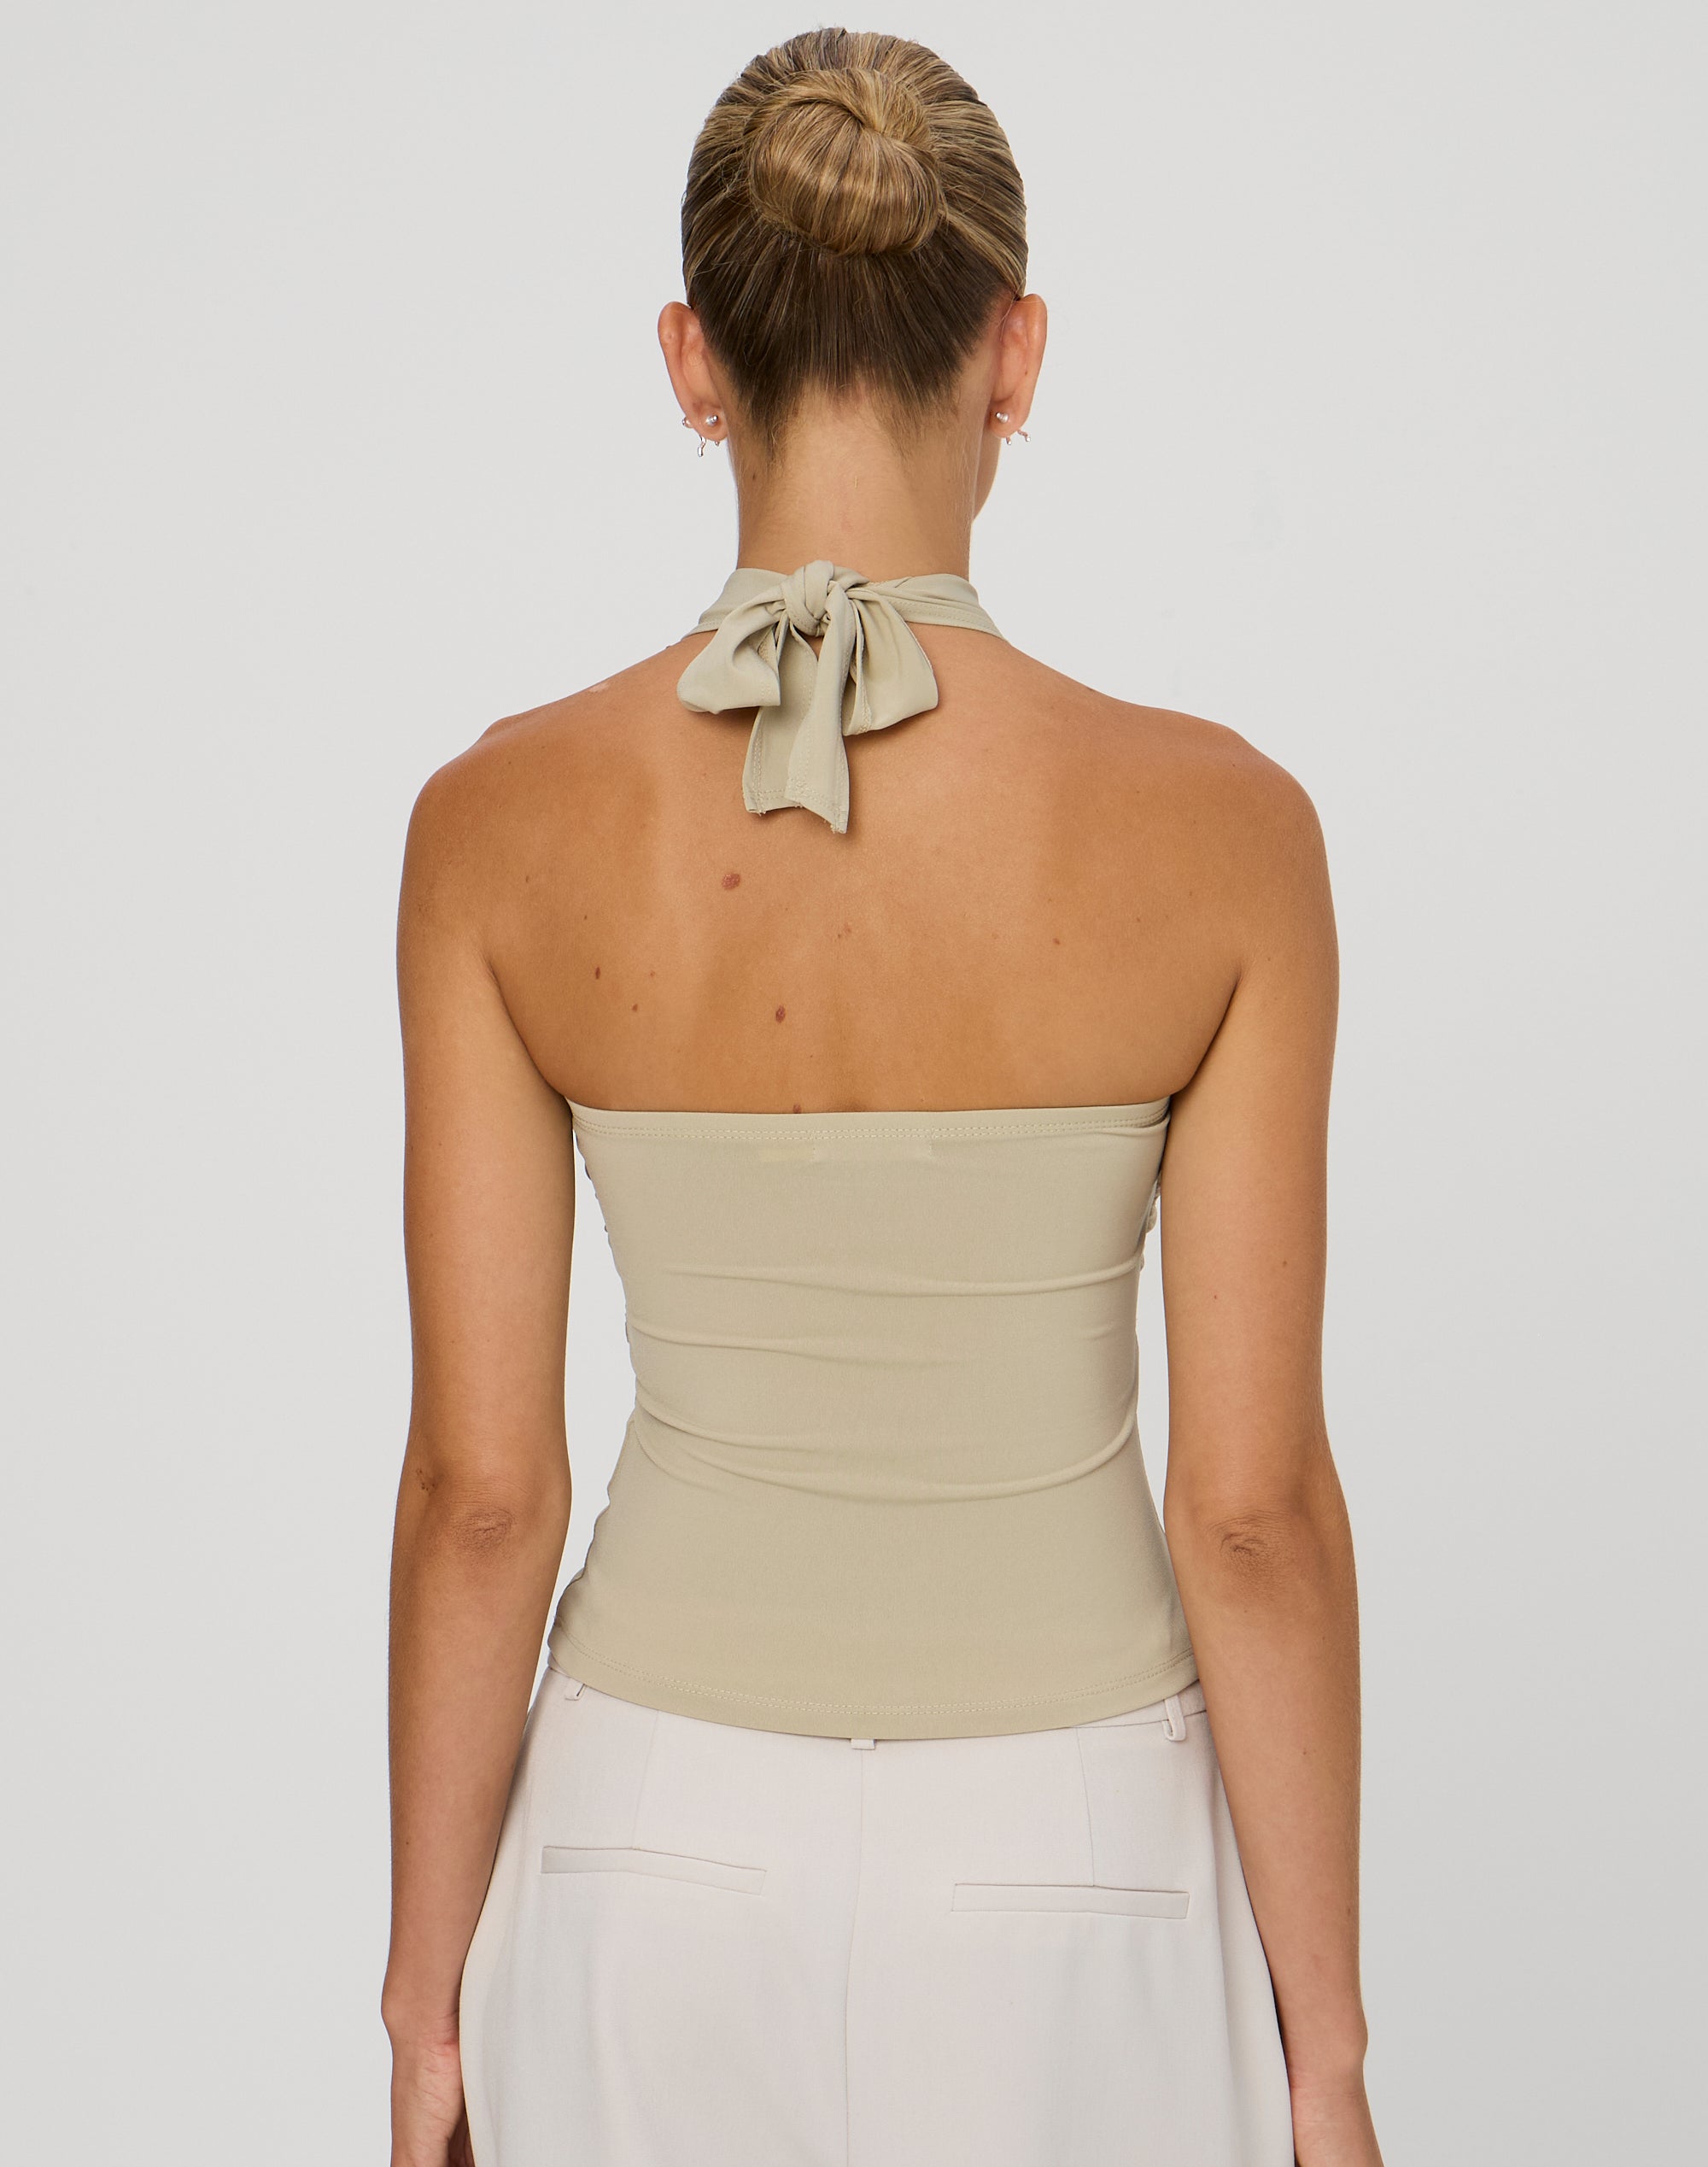 Wrap Halter Top in Like A Moss